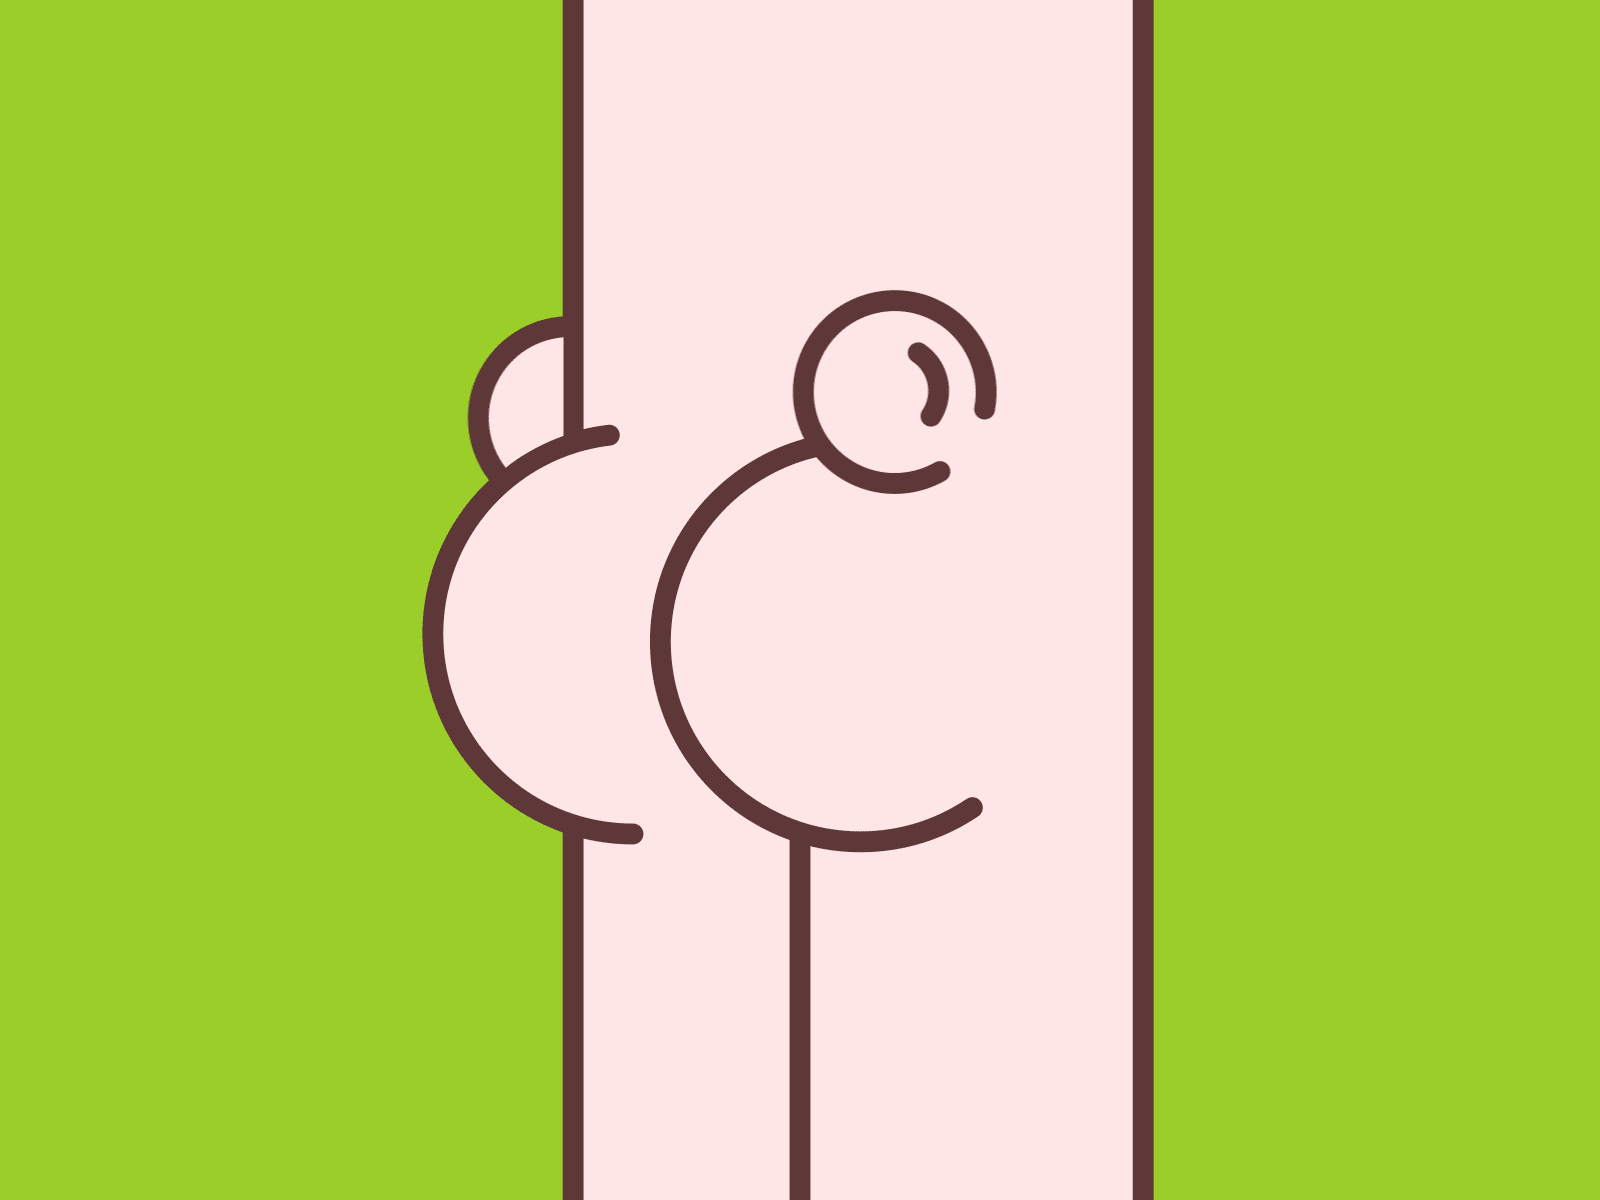 Ass with Ears animation ass illustration